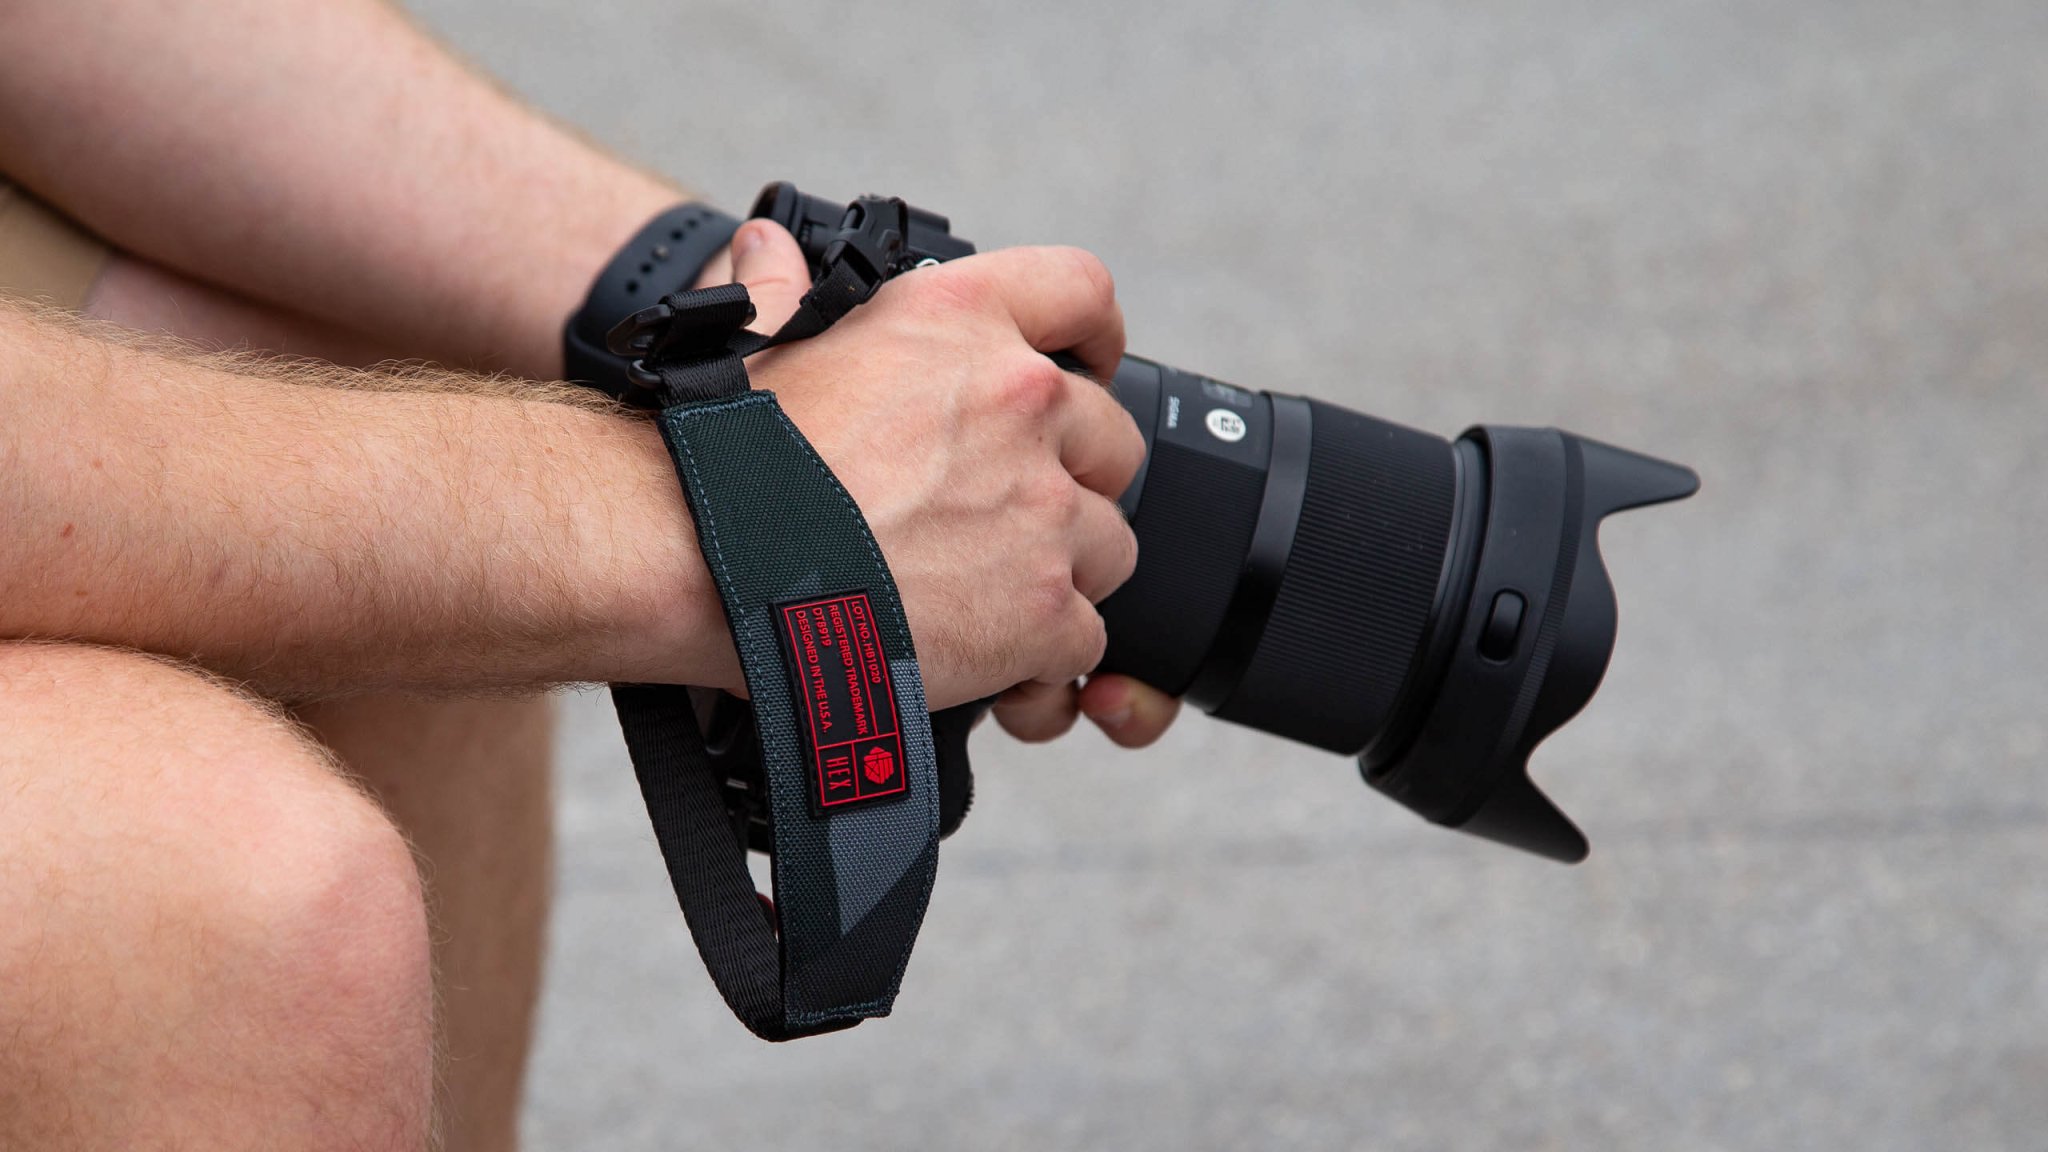 Reflections: Hex Ranger Camera Wrist Strap provides comfort, with zero security